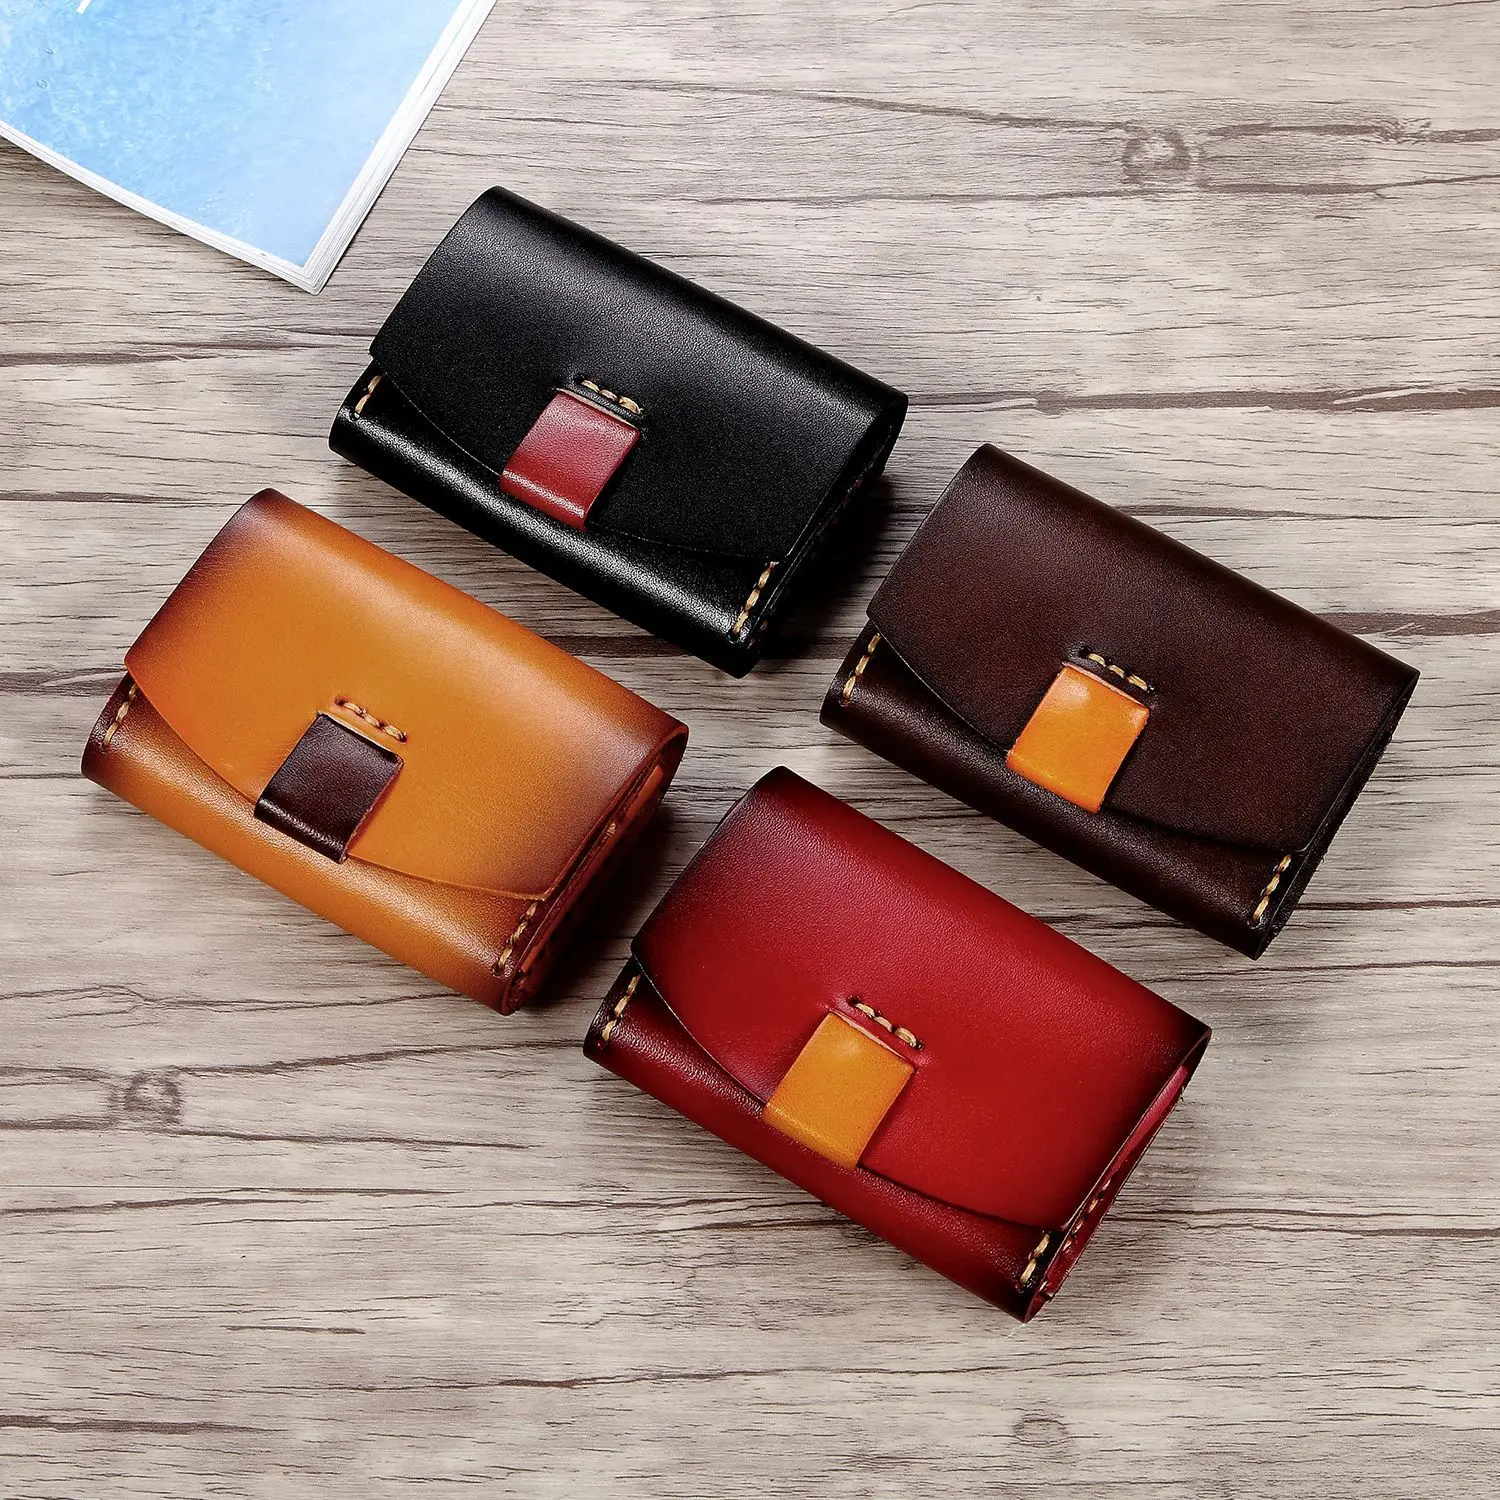 

2021 New Men Women Genuine Real Leather Vintage Wallet Vegetable Tanned Leather Coin Purse Credit Bank Card Case Holder